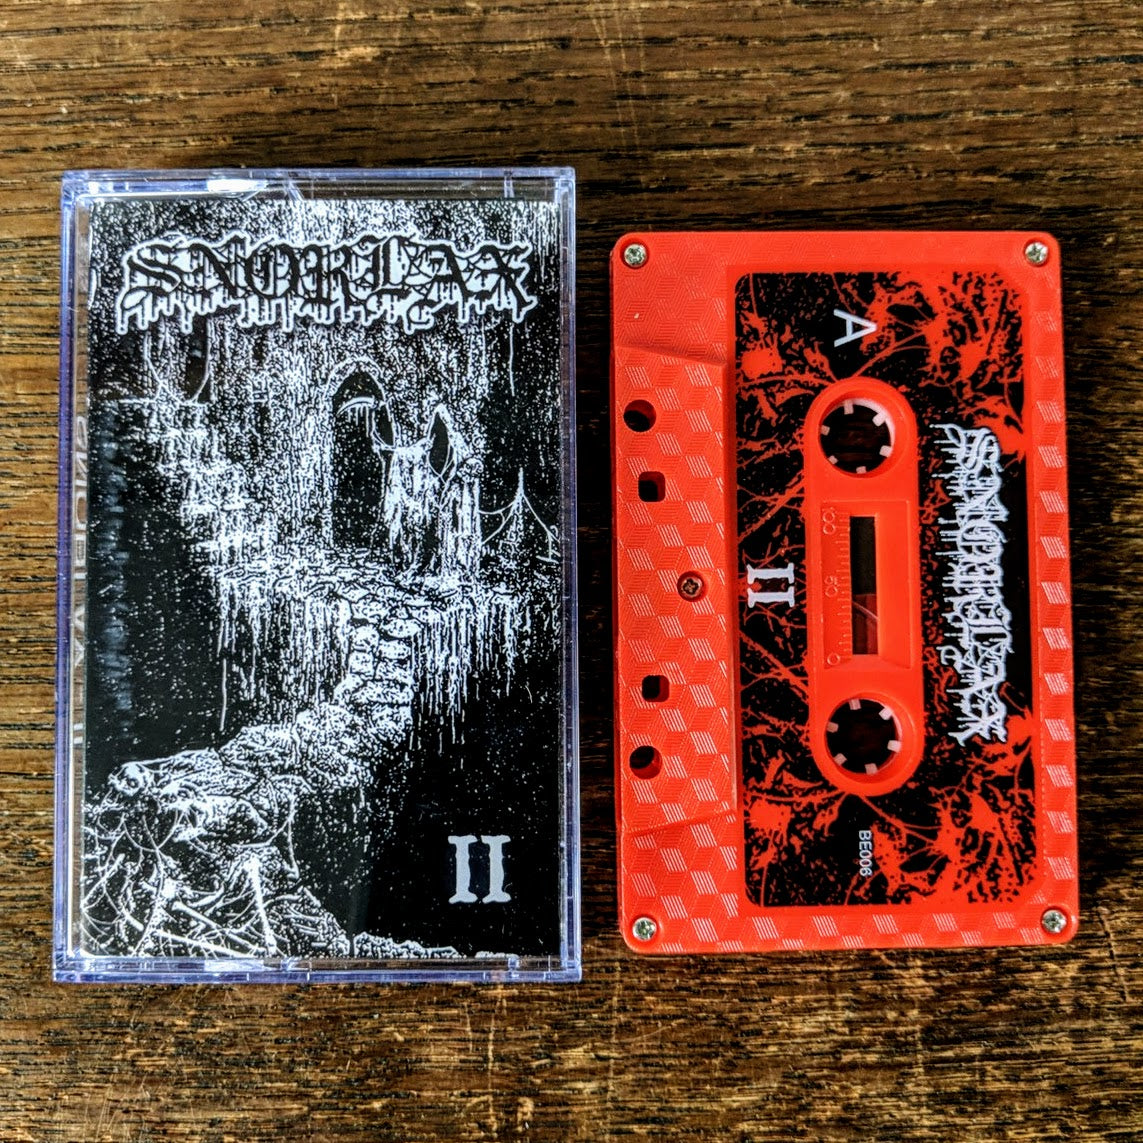 [SOLD OUT] SNORLAX "II" Cassette Tape